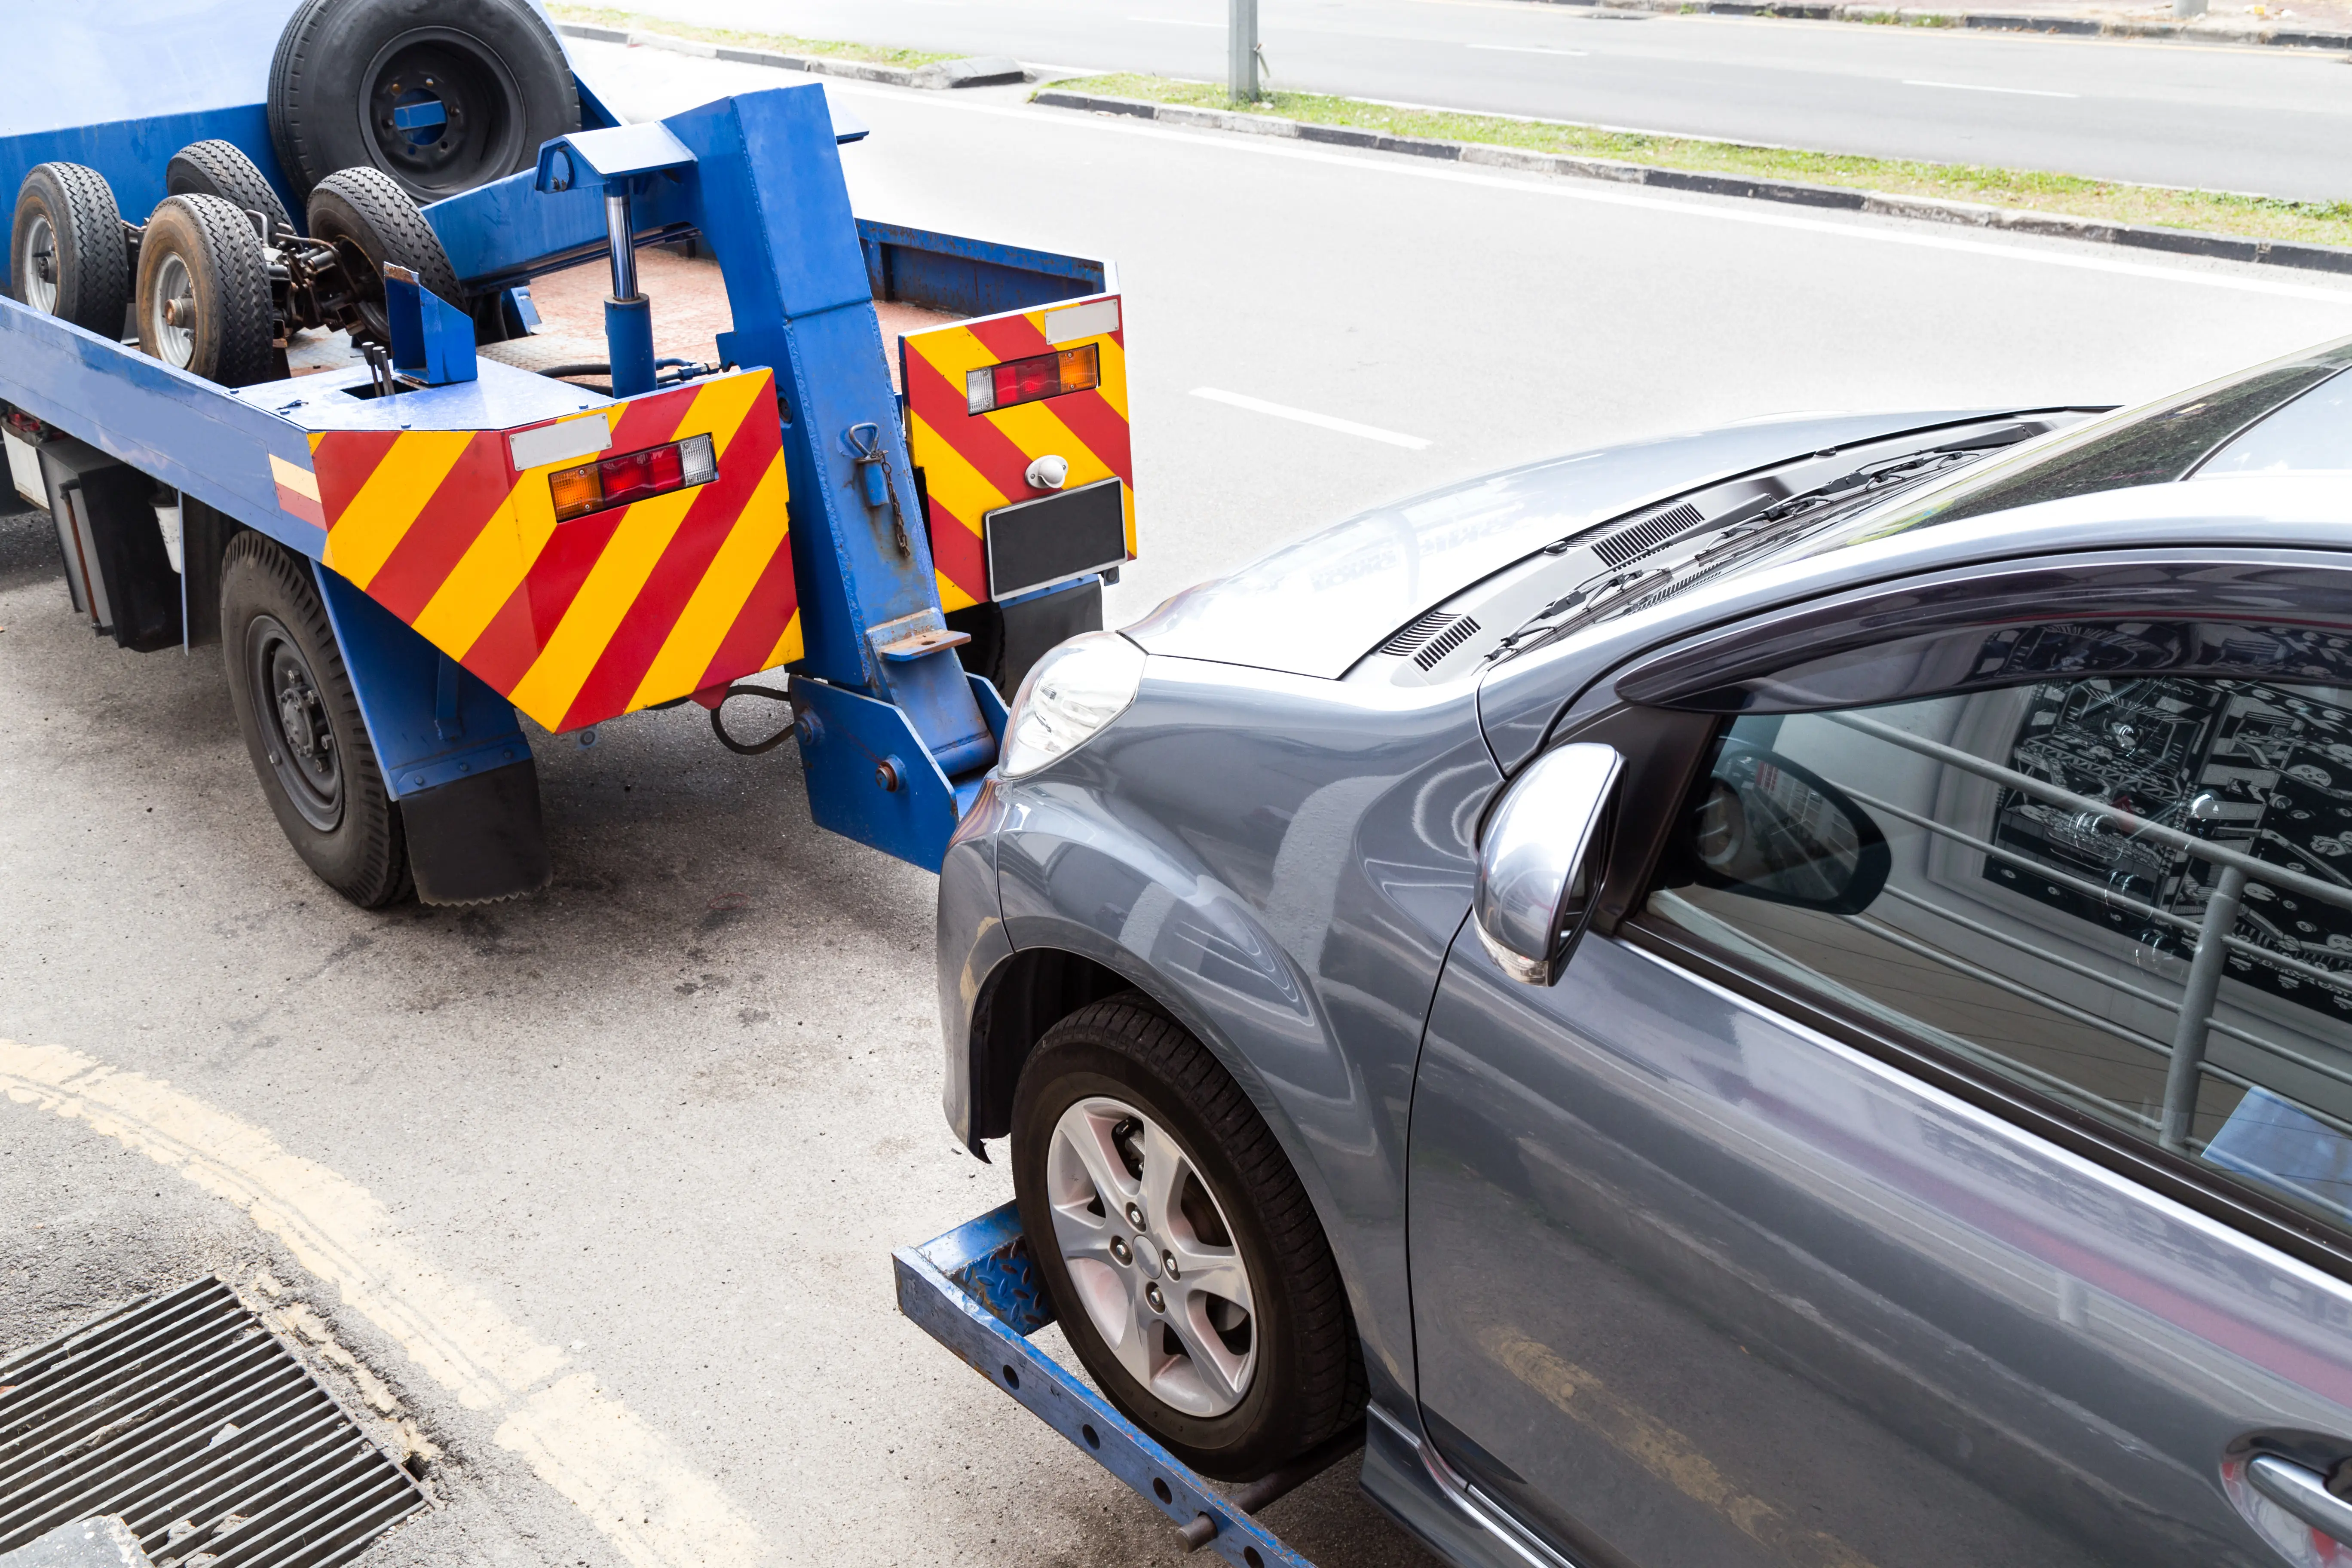 Exclusive-Towing-Service-Leads--in-Jacksonville-Florida-Exclusive-Towing-Service-Leads-15164-image